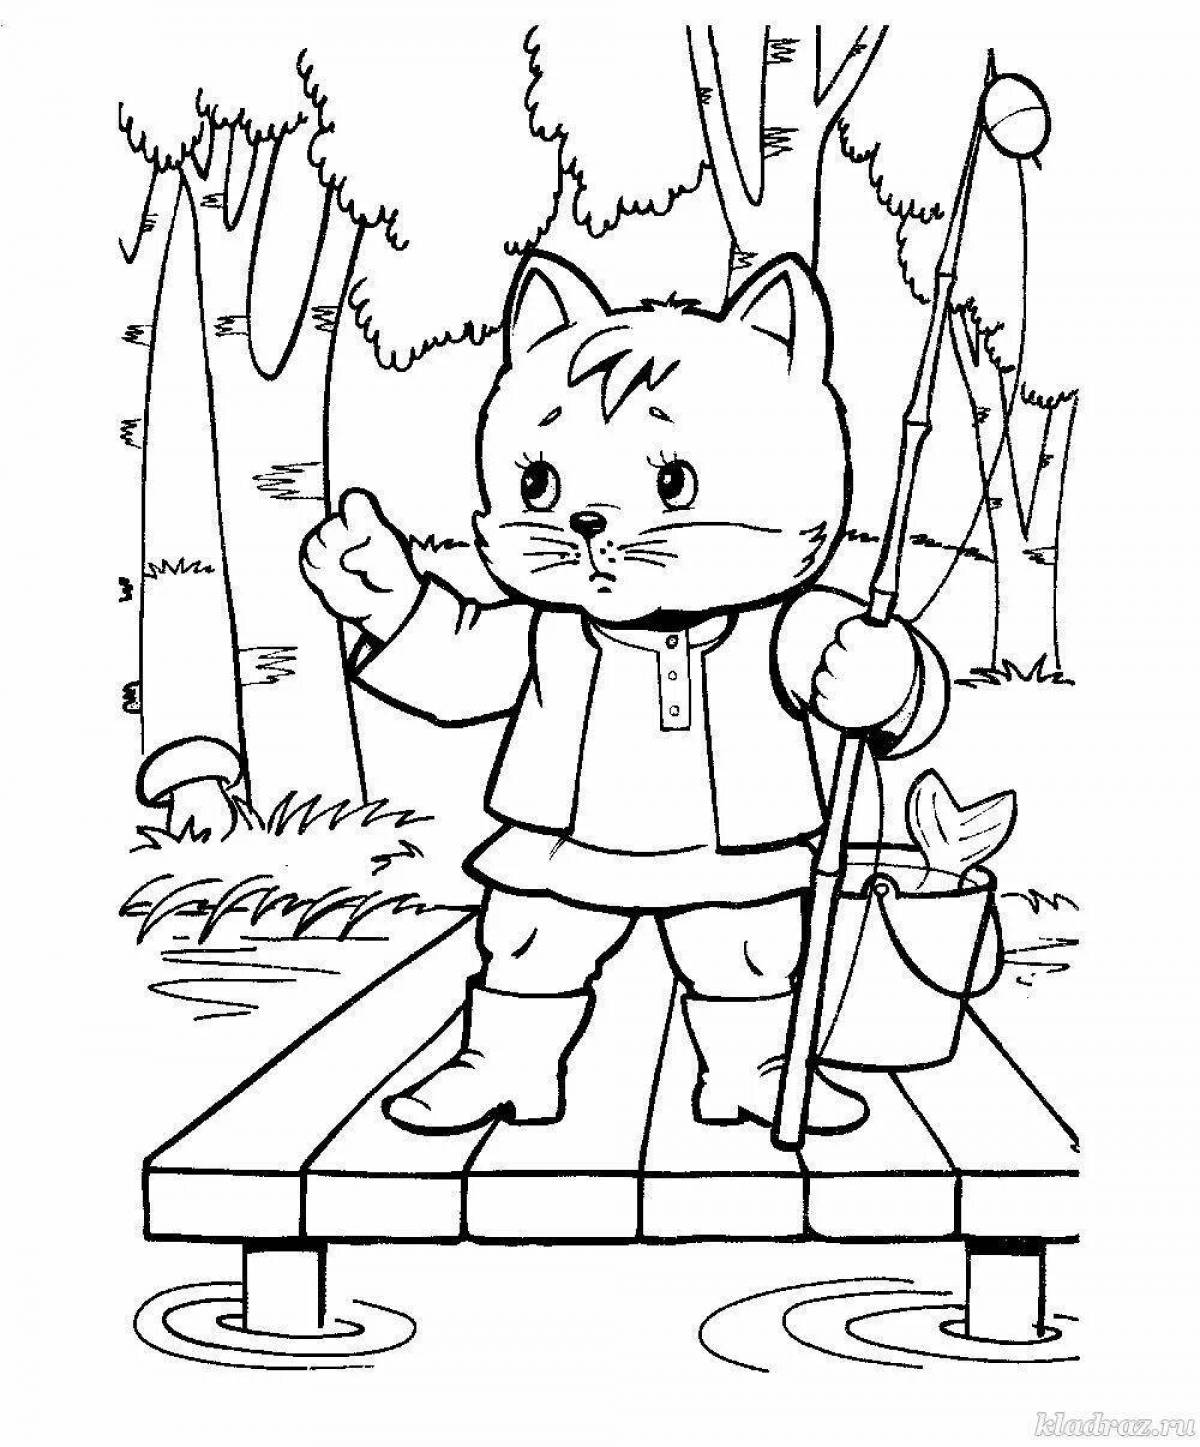 Exciting fox and rooster coloring book